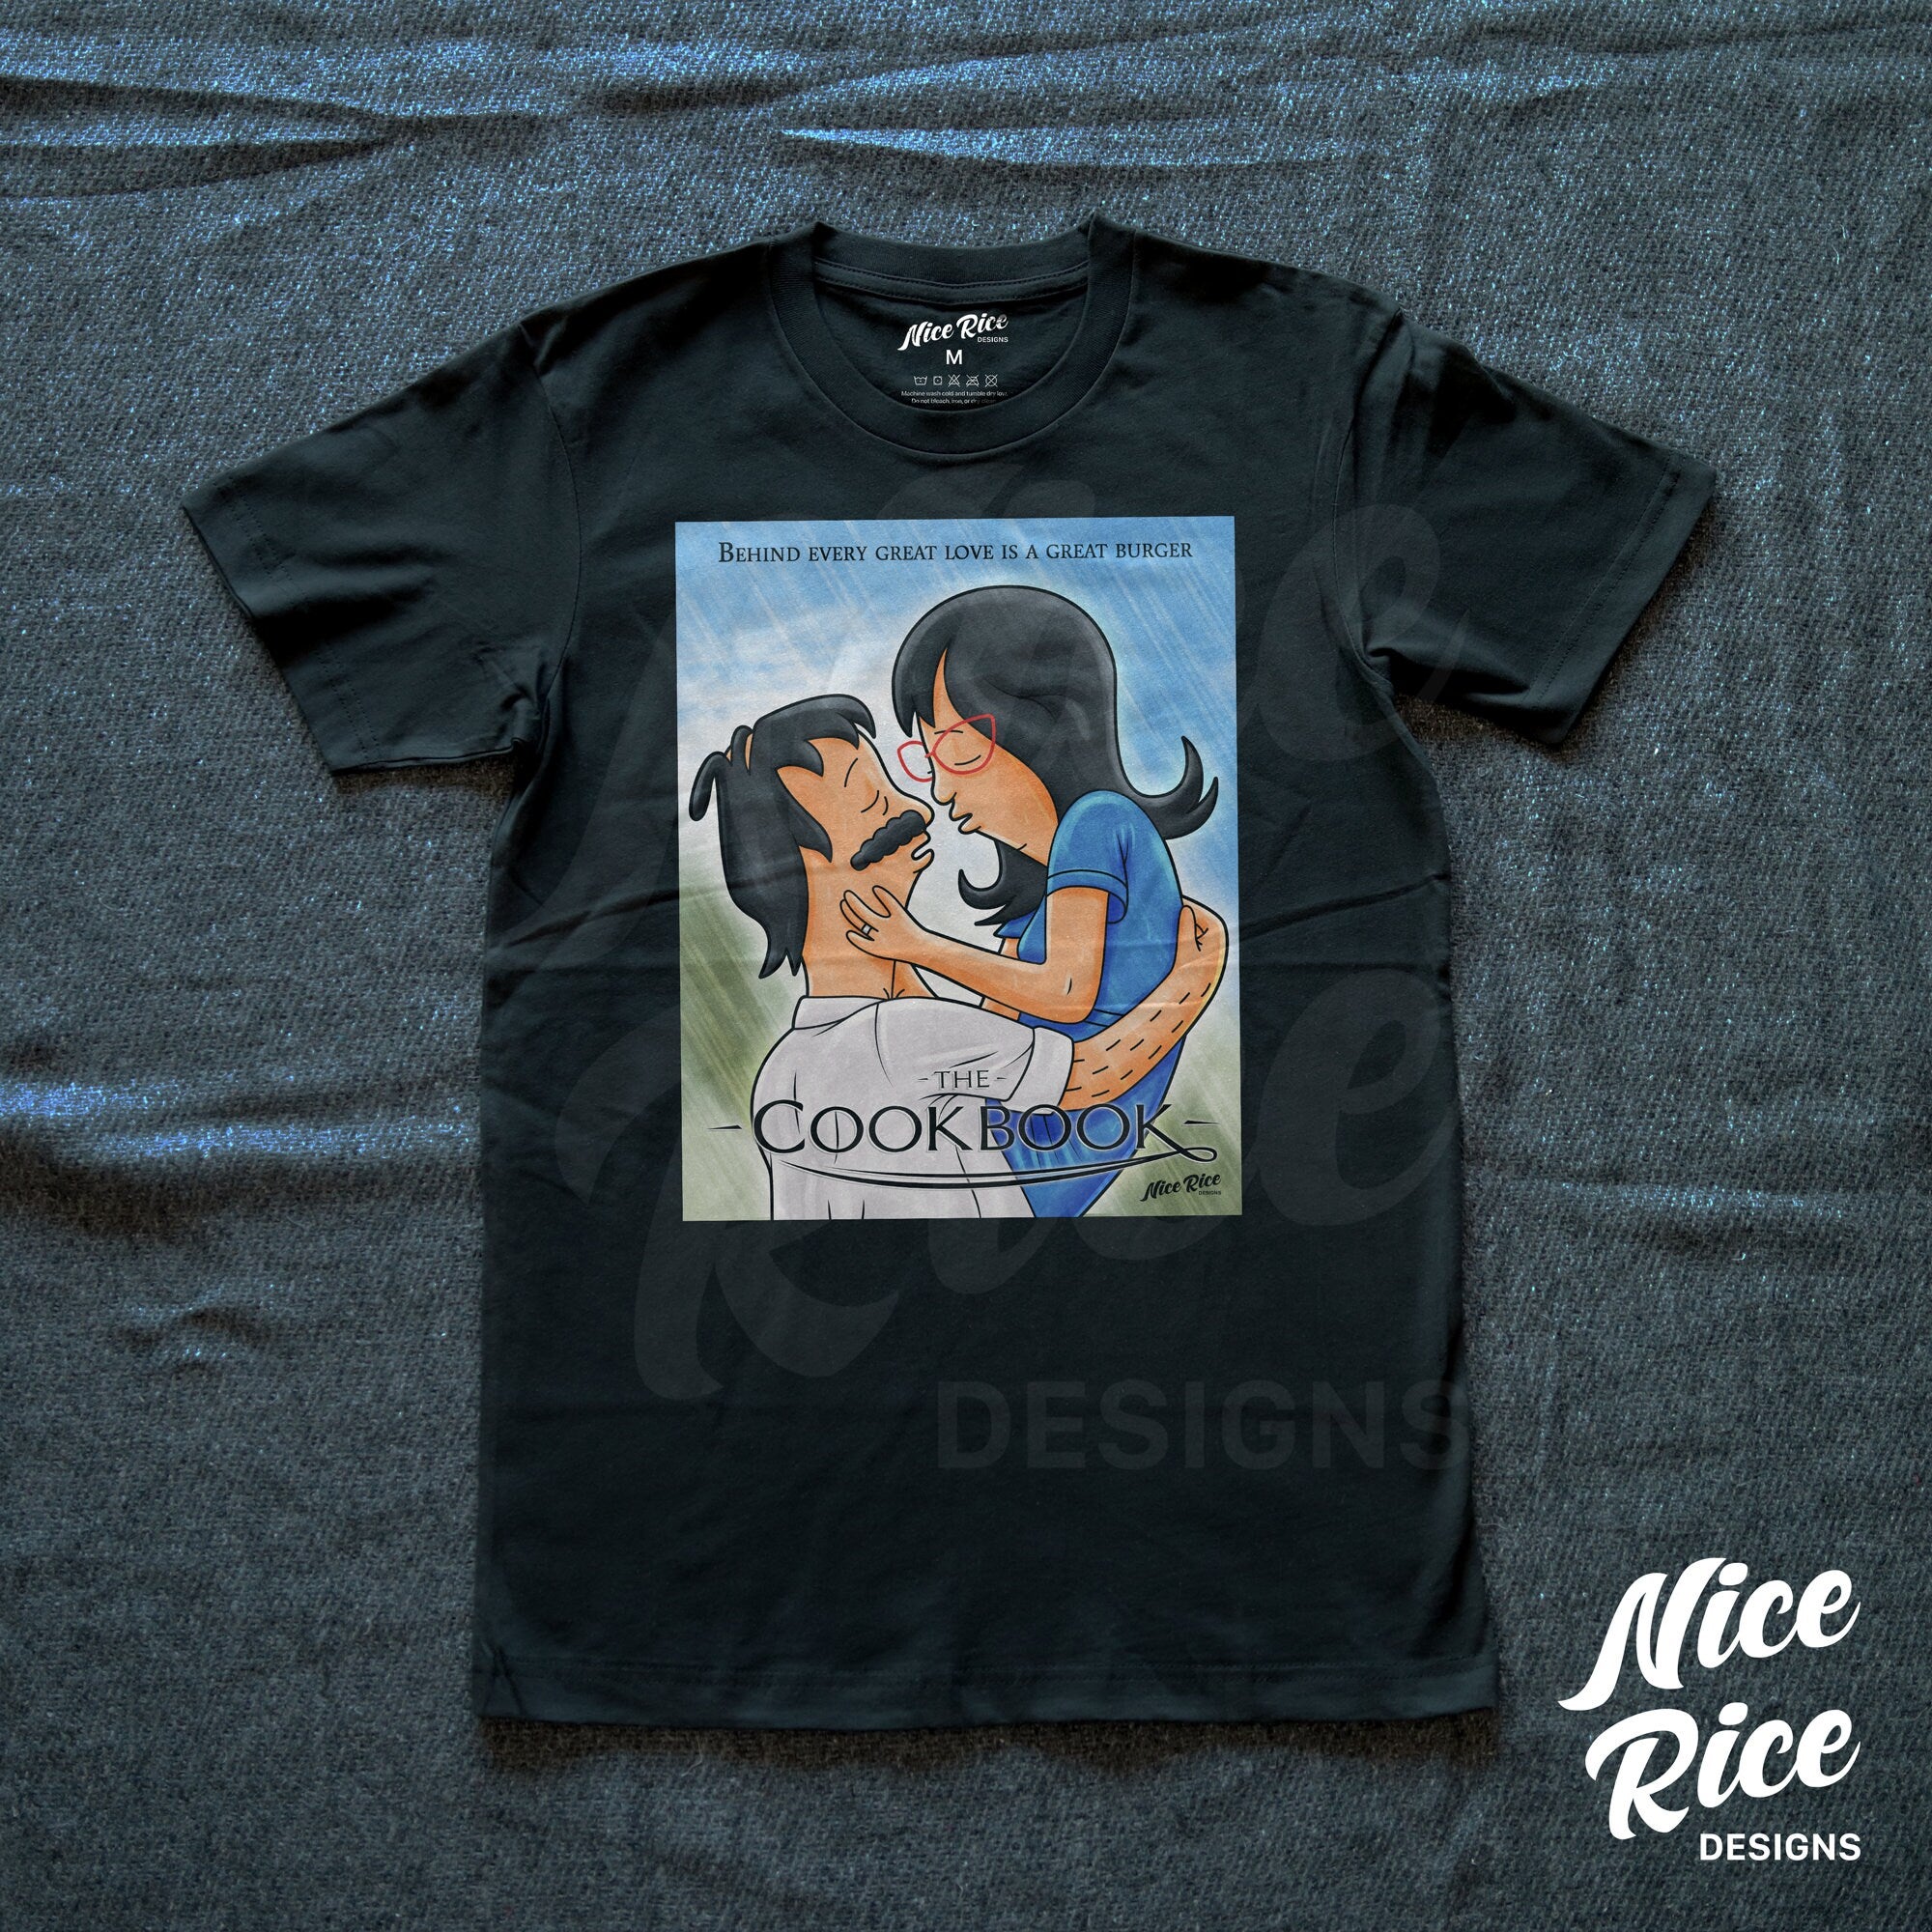 The Cookbook Shirt by Nice Rice Designs